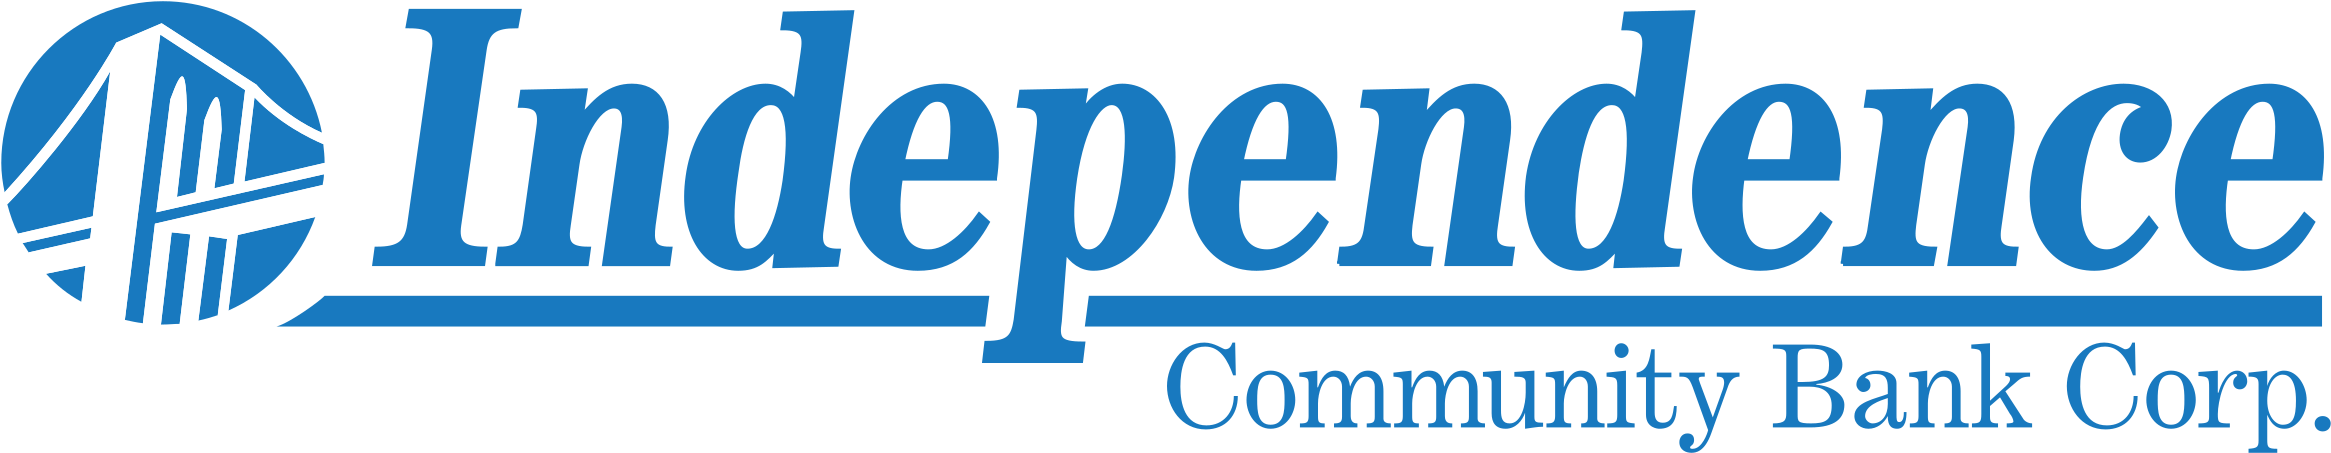 Independence Community Bank Corp Logo PNG